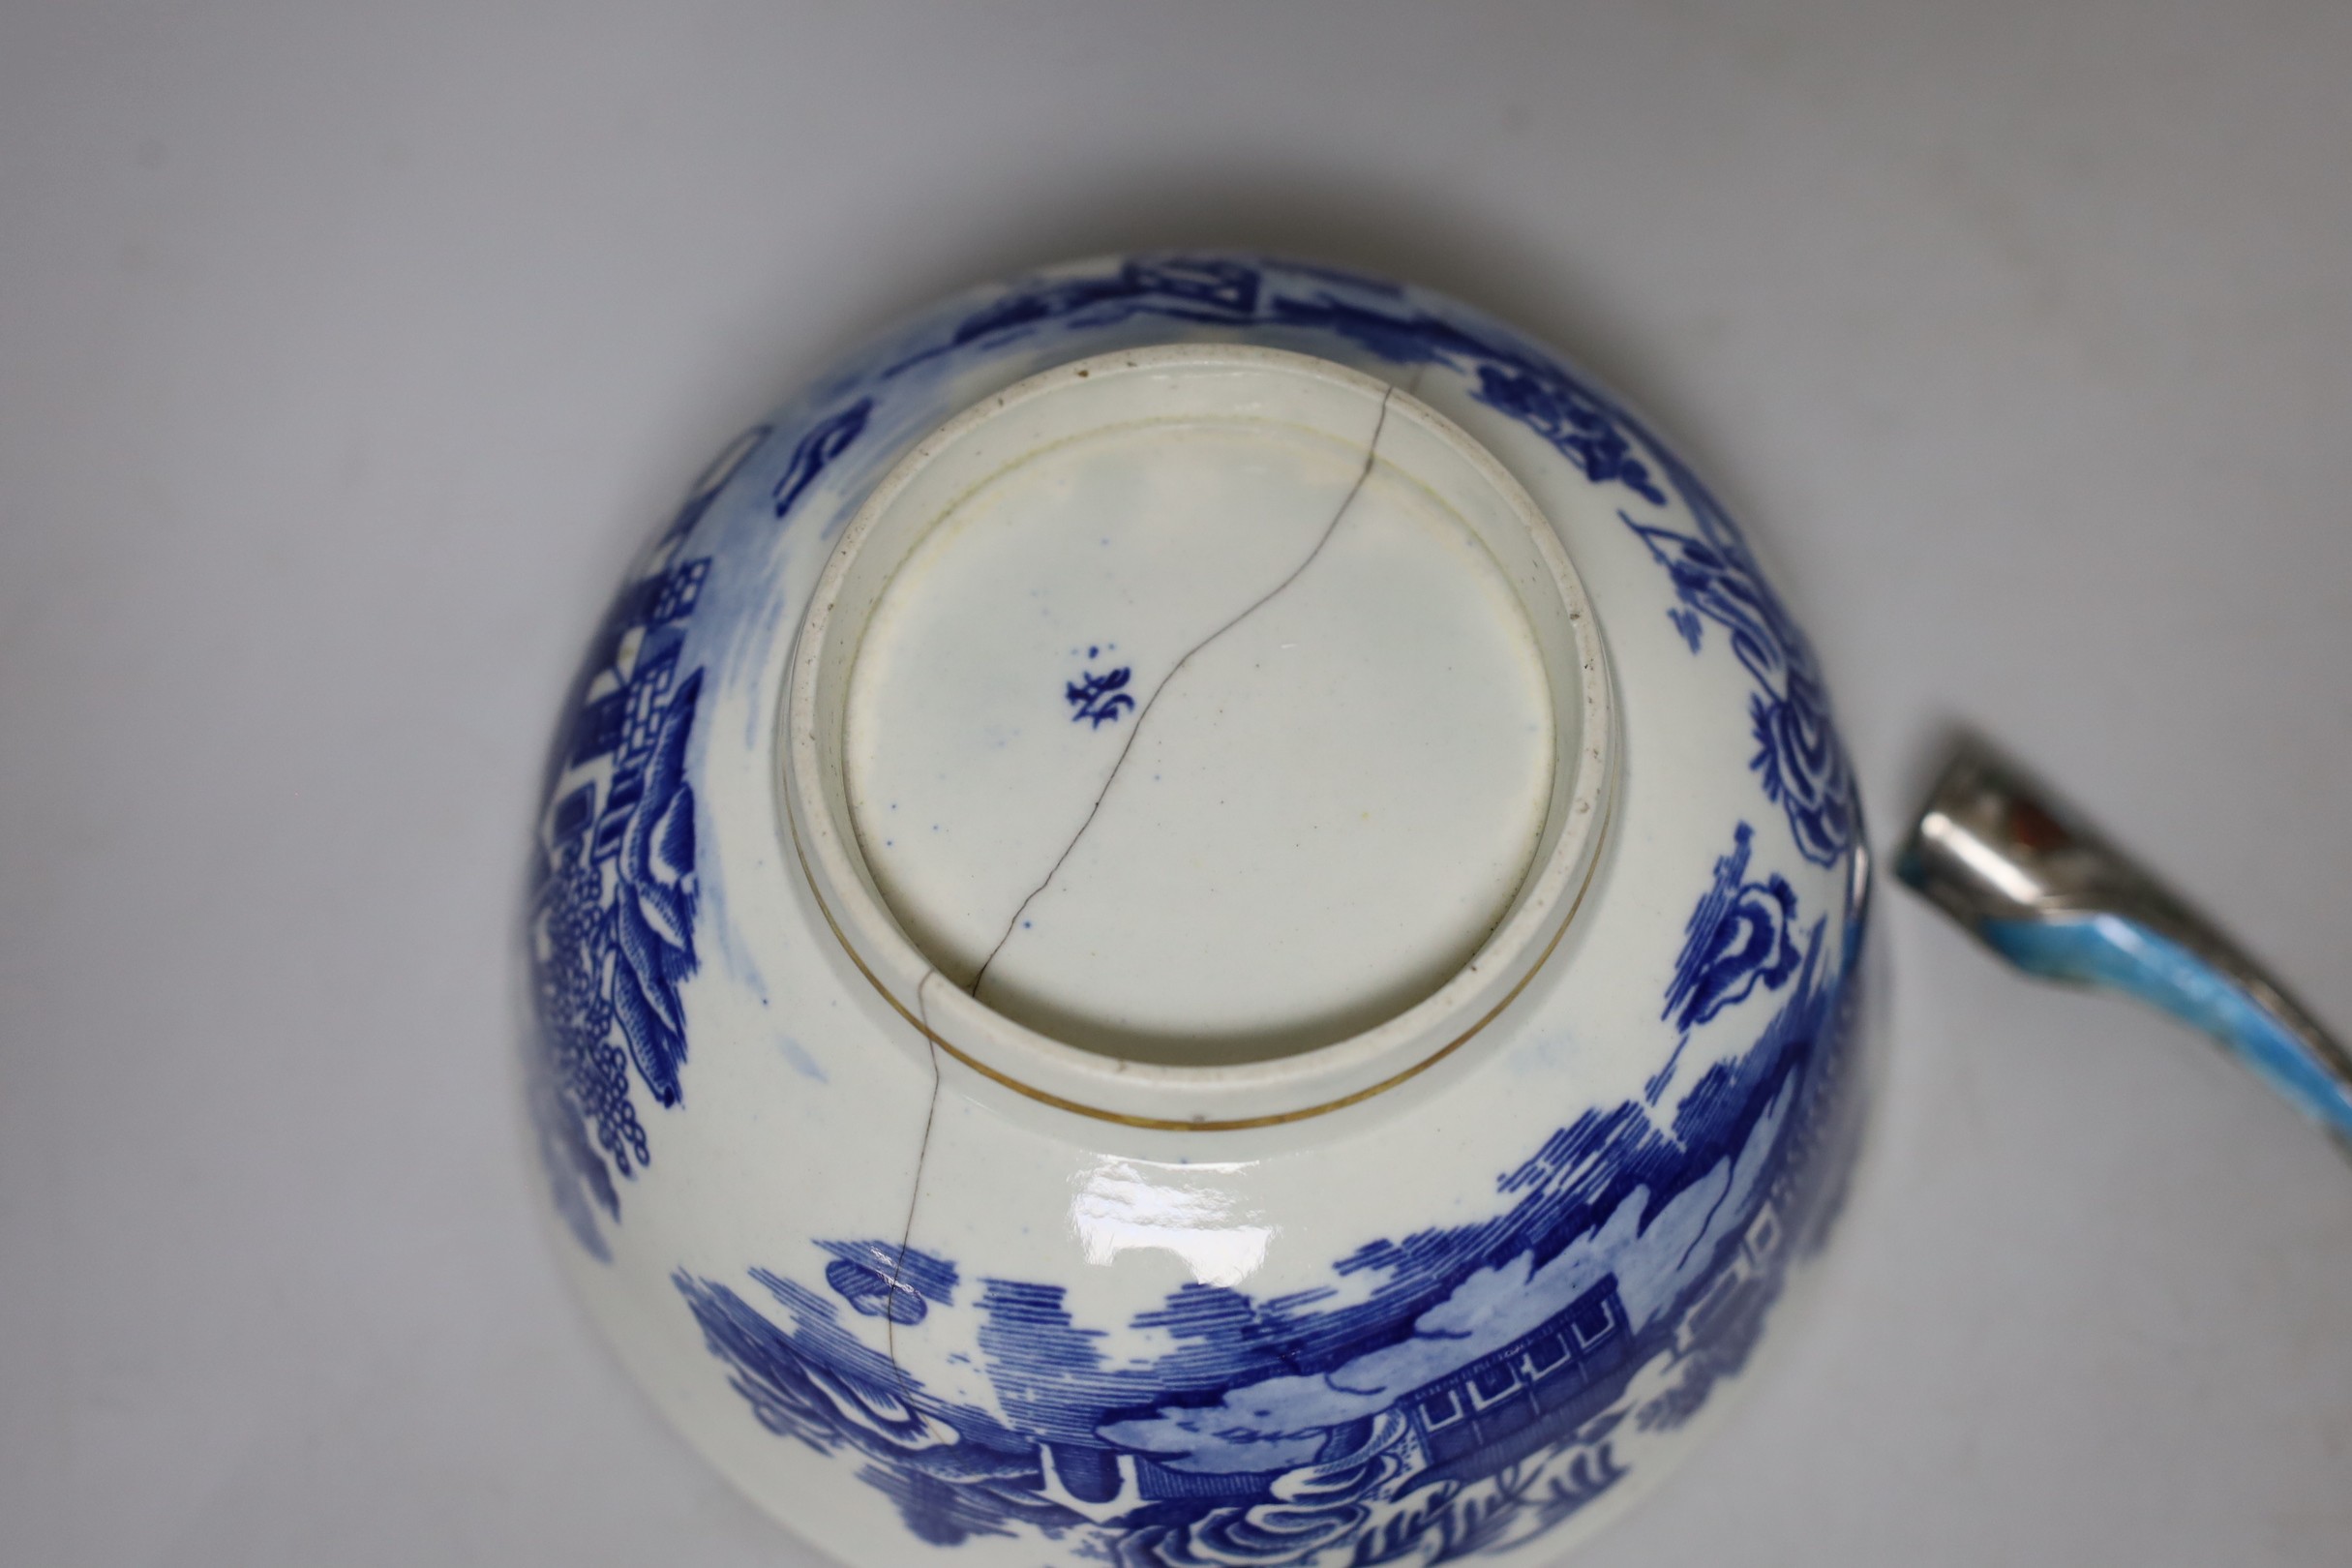 An English porcelain blue and white slop bowl, 15cm diameter, together with three miniature Chinese tea bowls and one nail guard